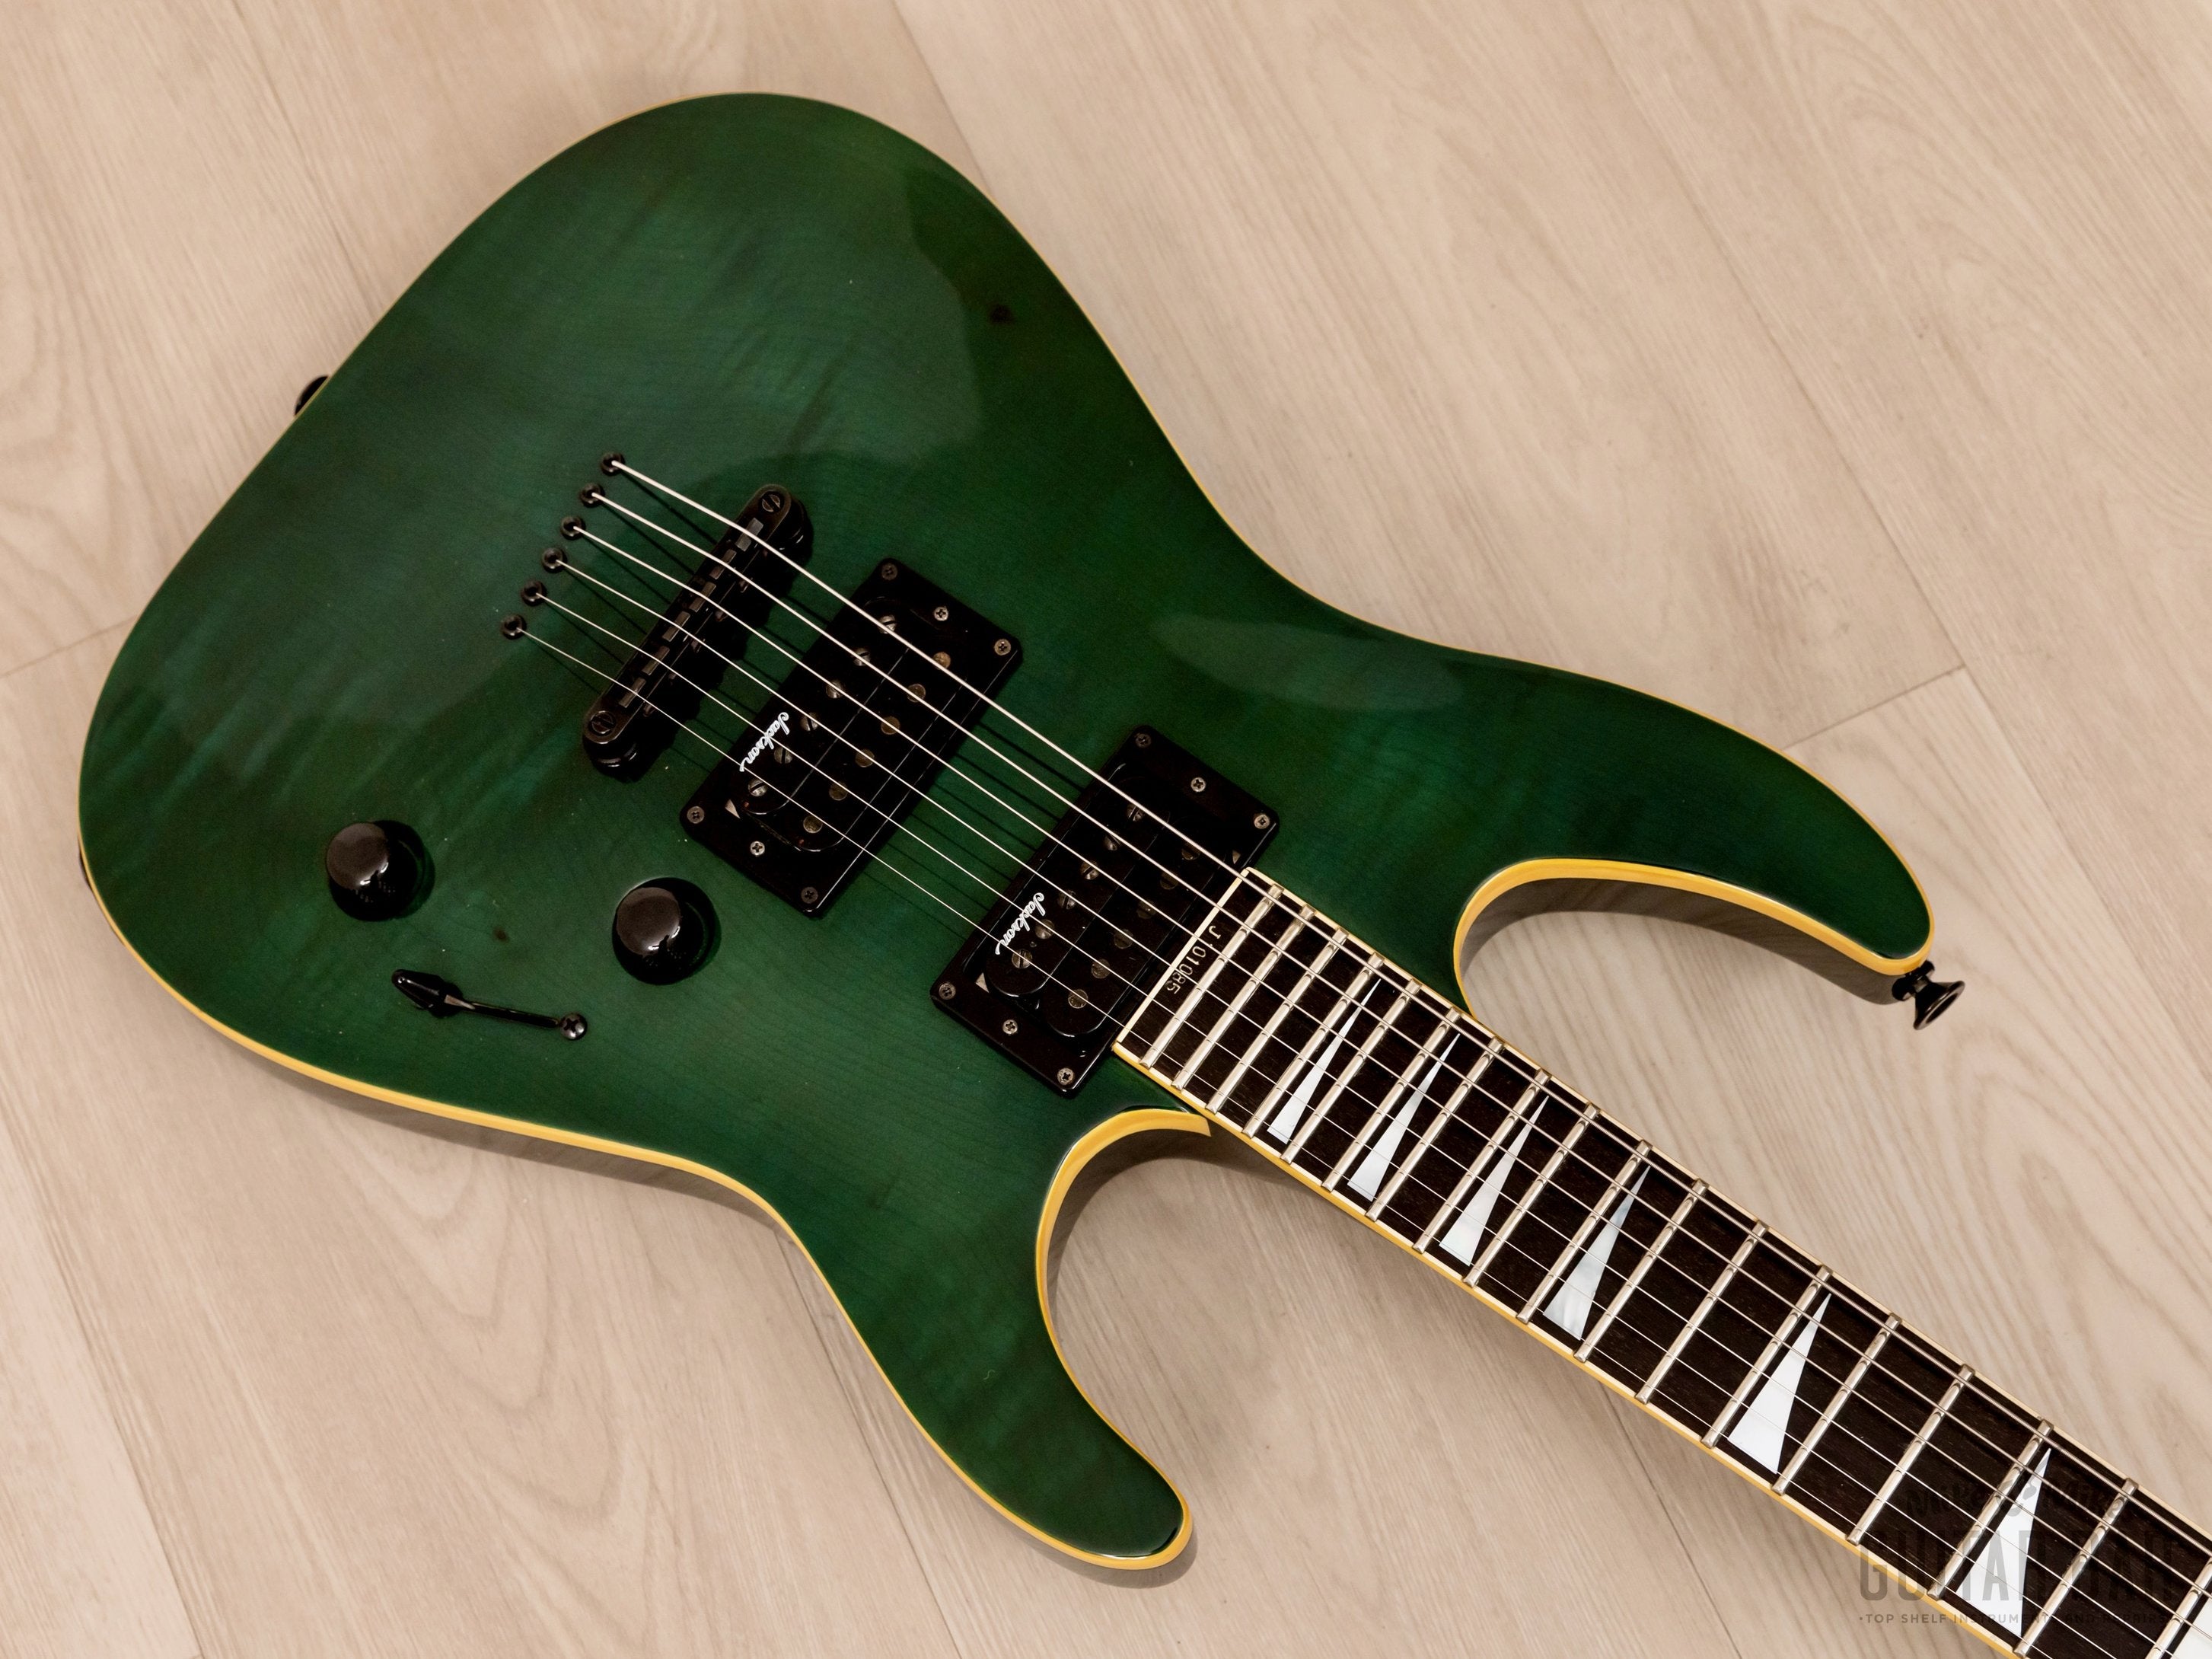 1991 Jackson Soloist Arched-Top Custom HH See-Through Green w/ Case & Tags, Japan